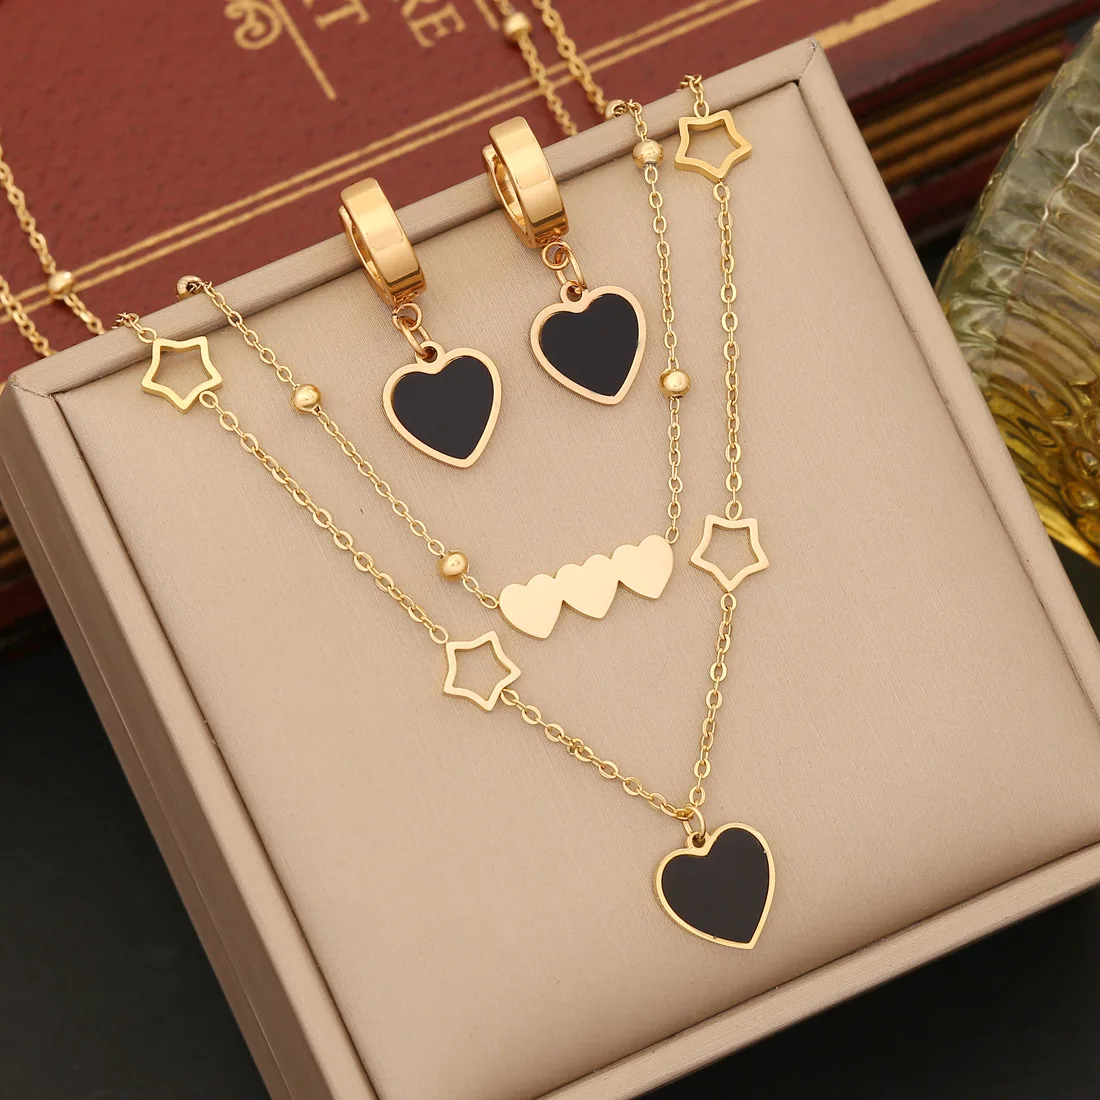 

Fine Black Heart Jewelry Set Fashion Stainless Steel 18K Gold Plated Layered Pendant Necklace Bracelet Earrings Indian for Women